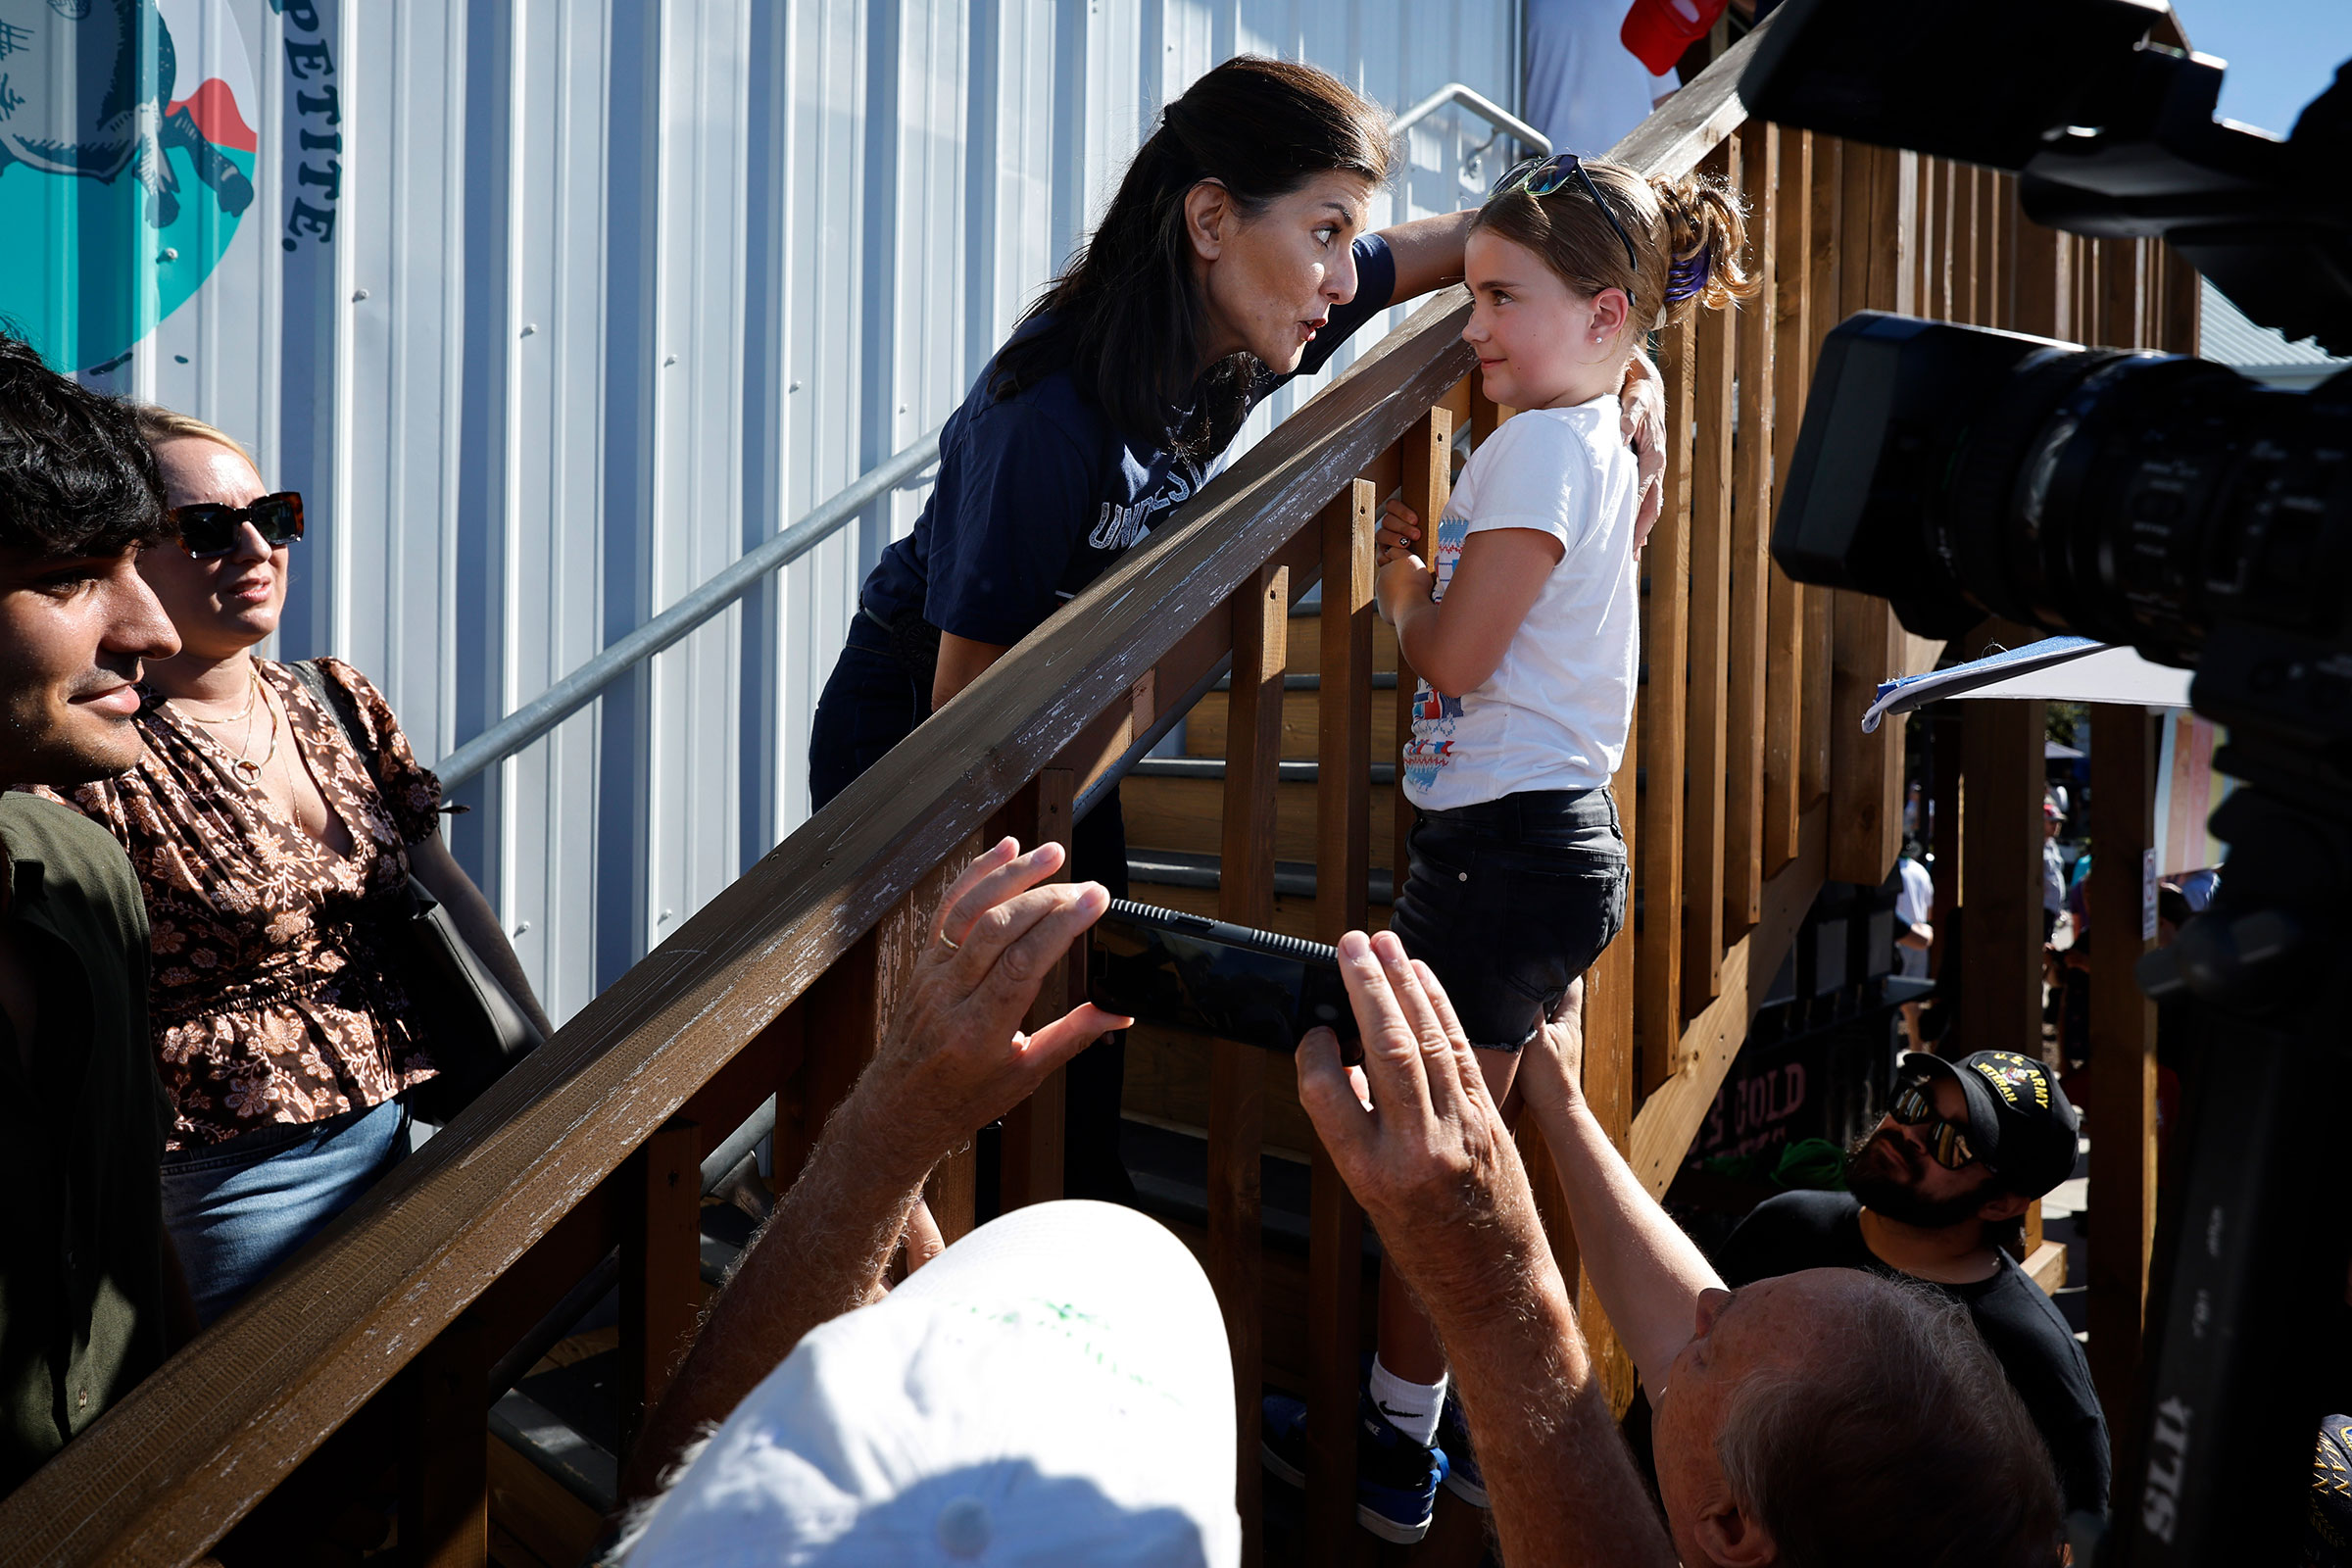 Former South Carolina Governor and Ambassador to the United Nations Nikki Haley speaks with a young fairgoer  on Aug. 12. (Chip Somodevilla—Getty Images)